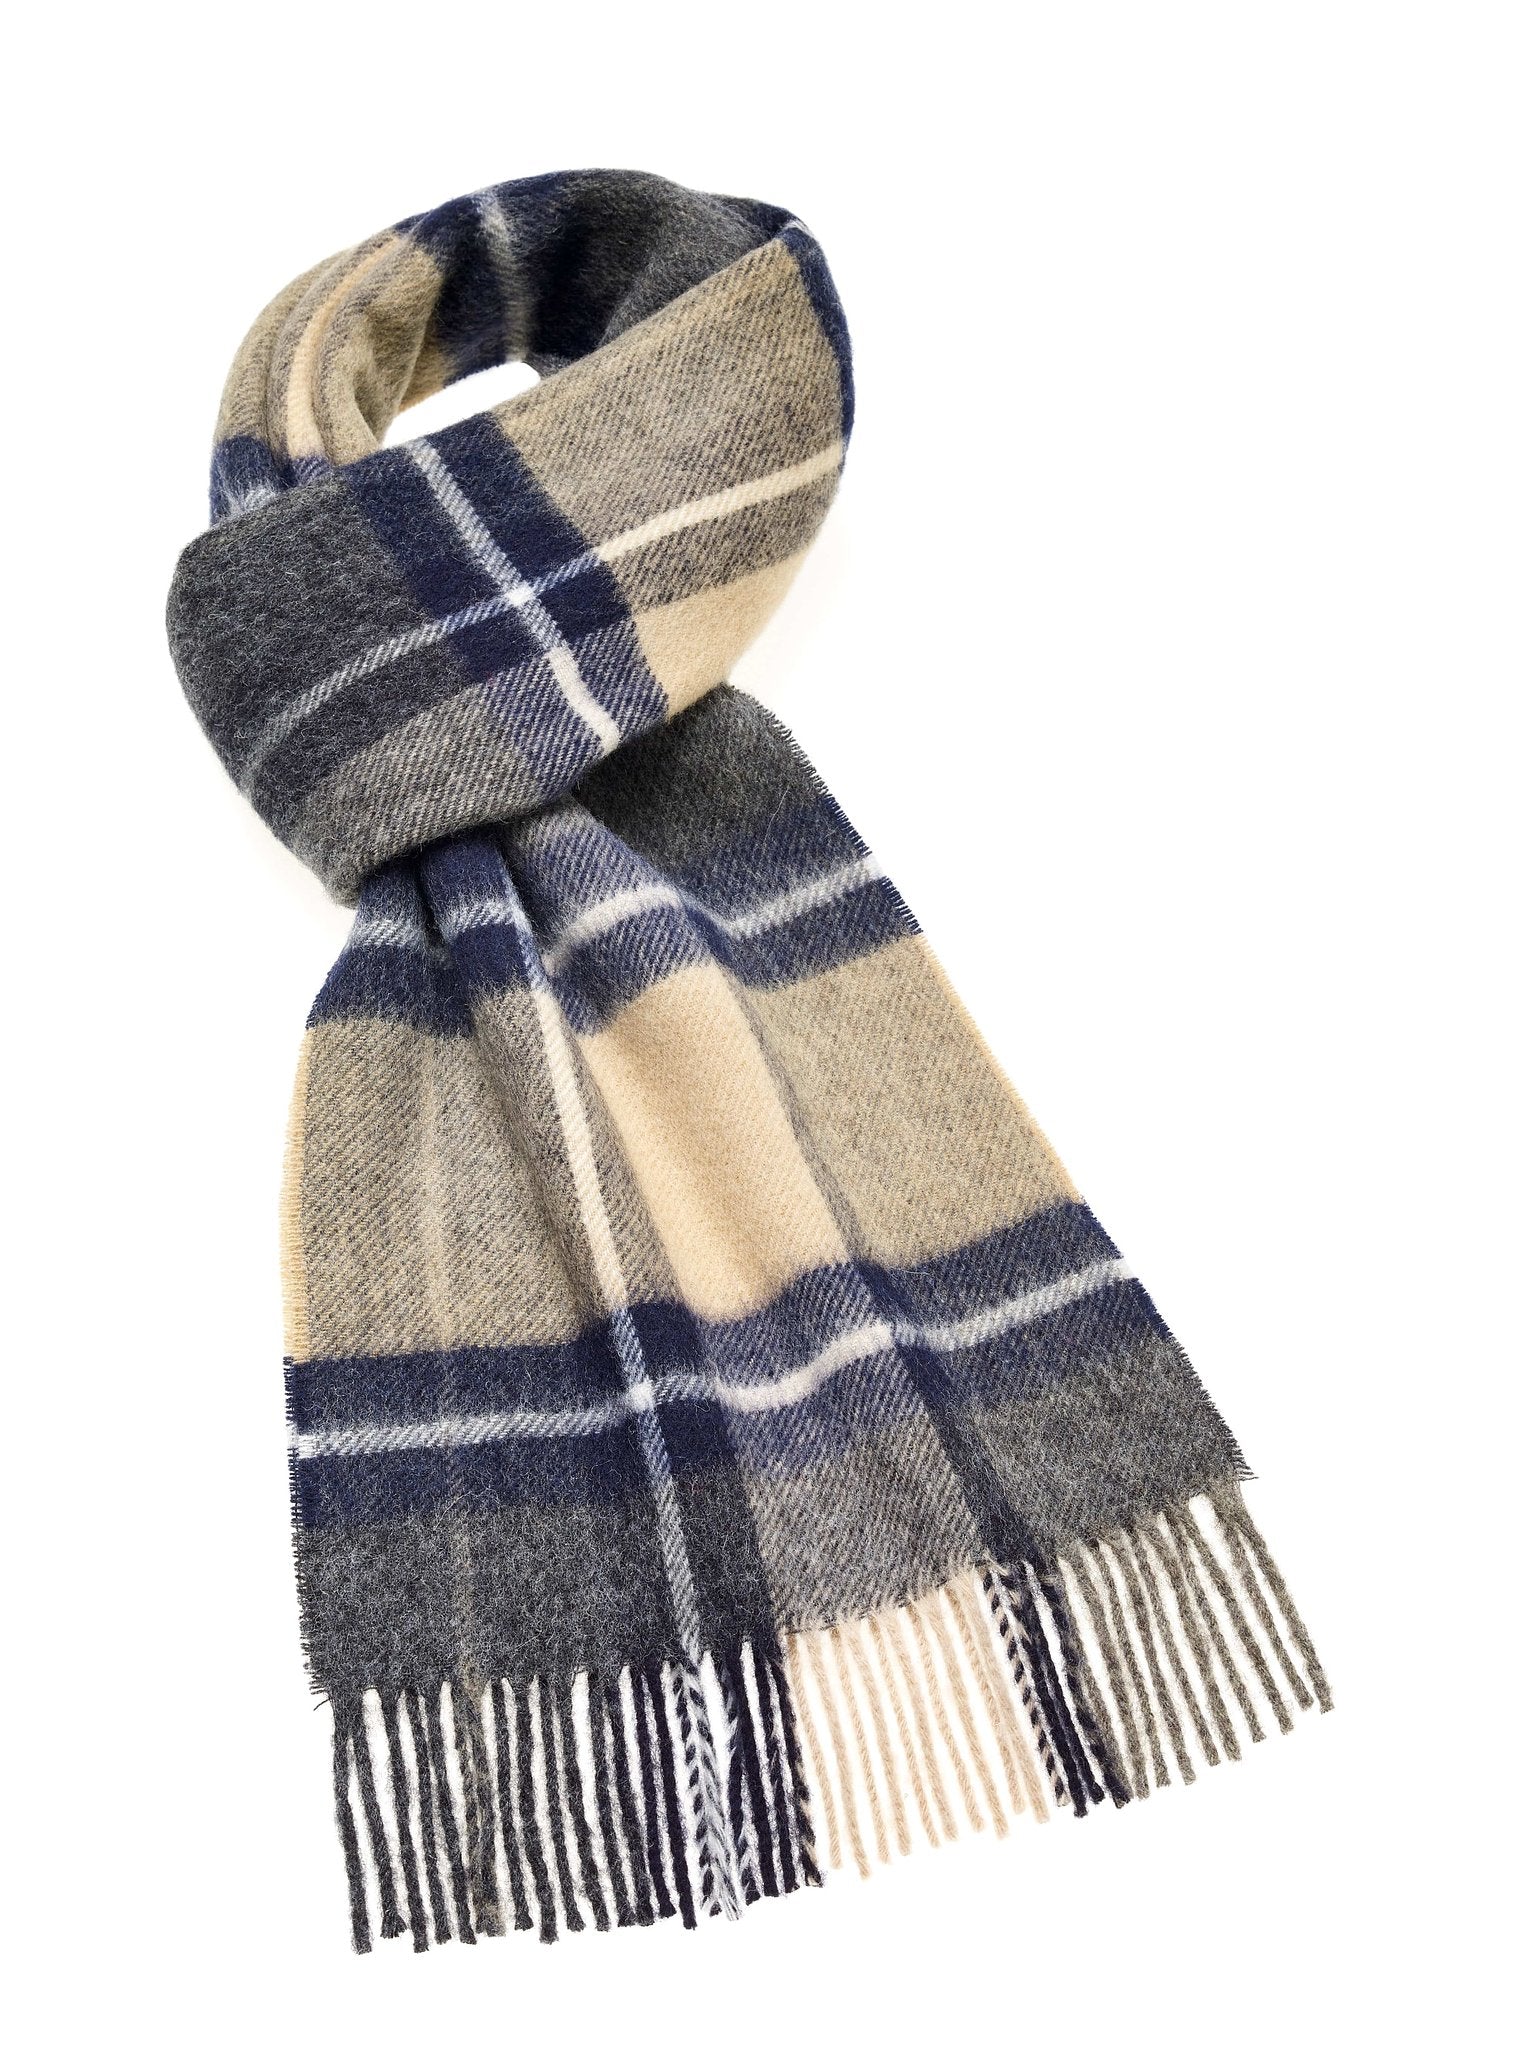 Sjaal Madison Blauw (Navy) Camel - Meriono Lamswol - 25 x 190 - Bronte by Moon Scotland